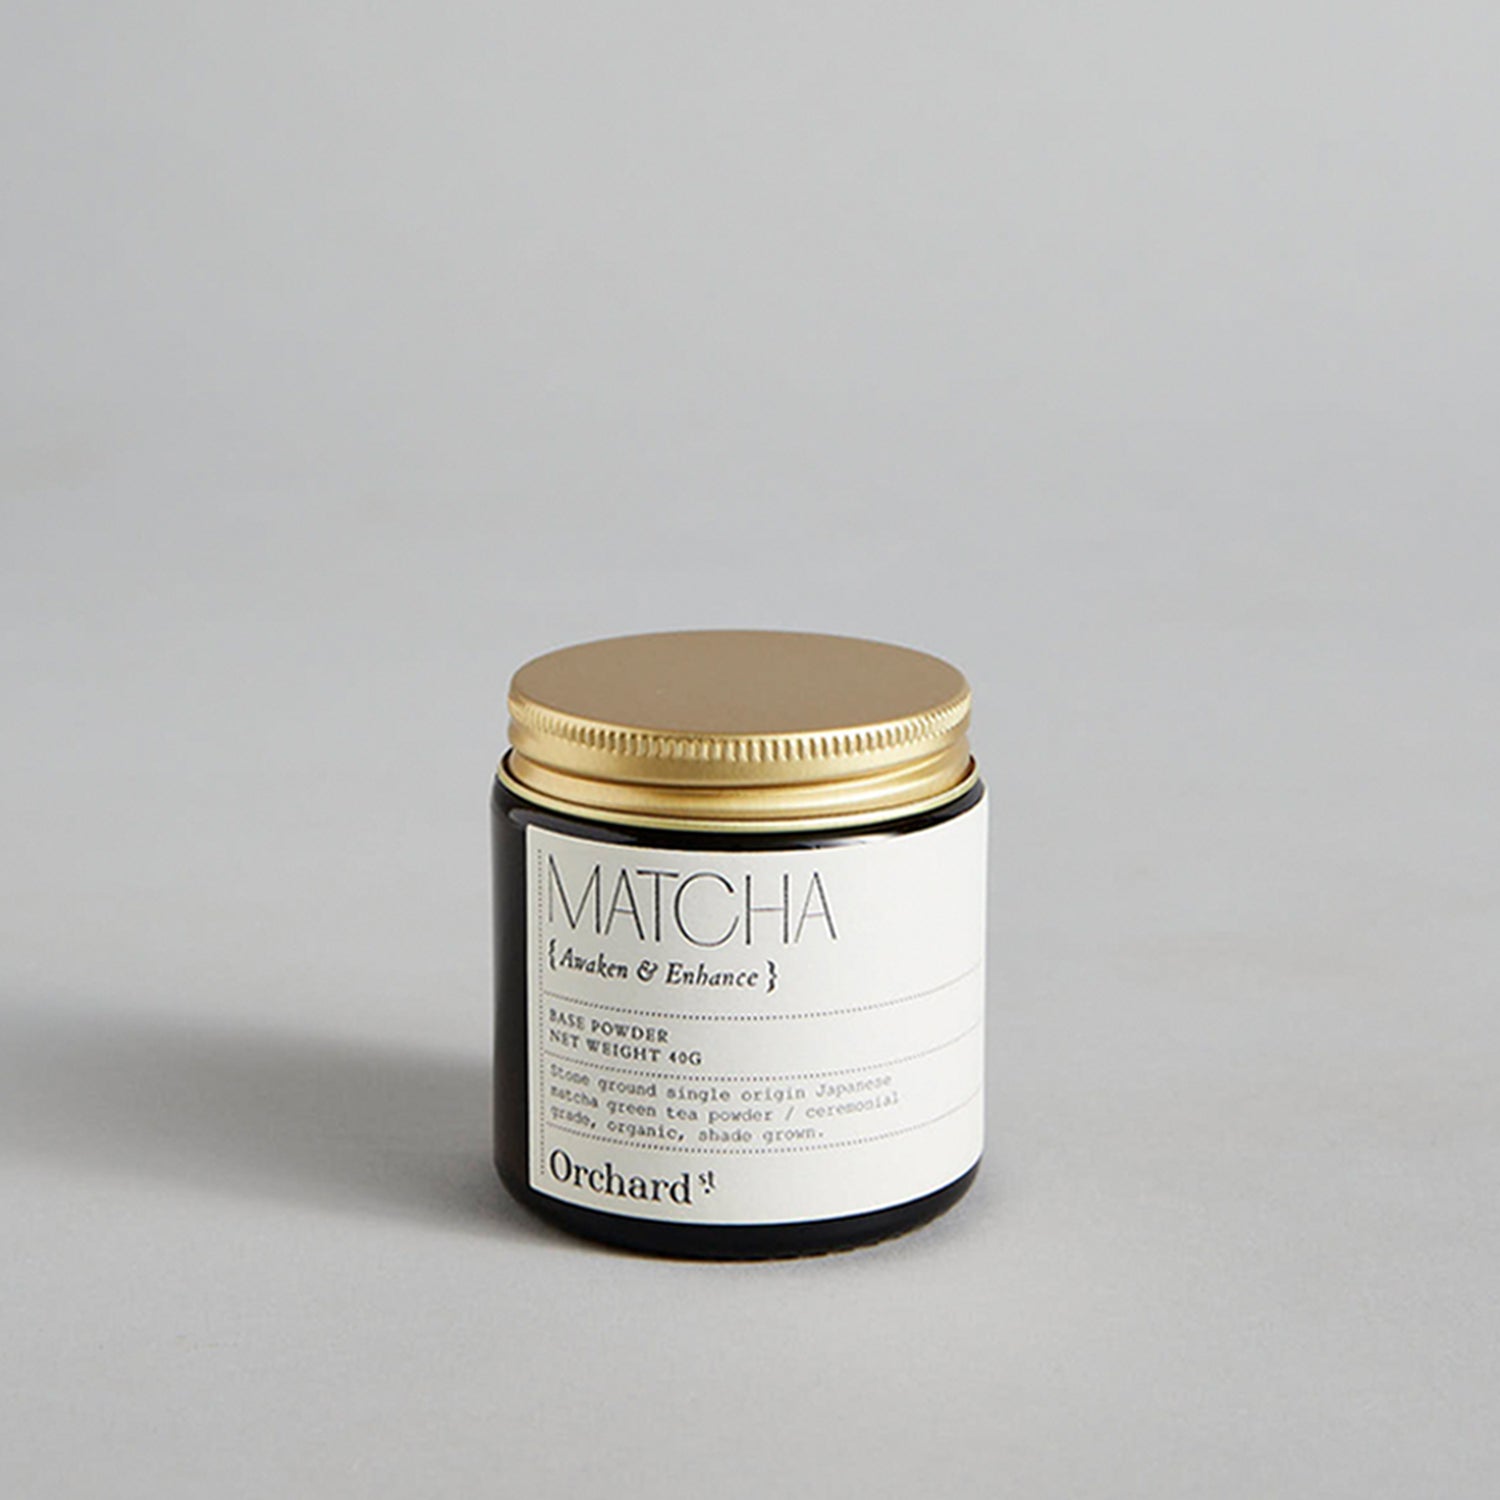 CEREMONIAL GRADE JAPANESE MATCHA BY ORCHARD ST.